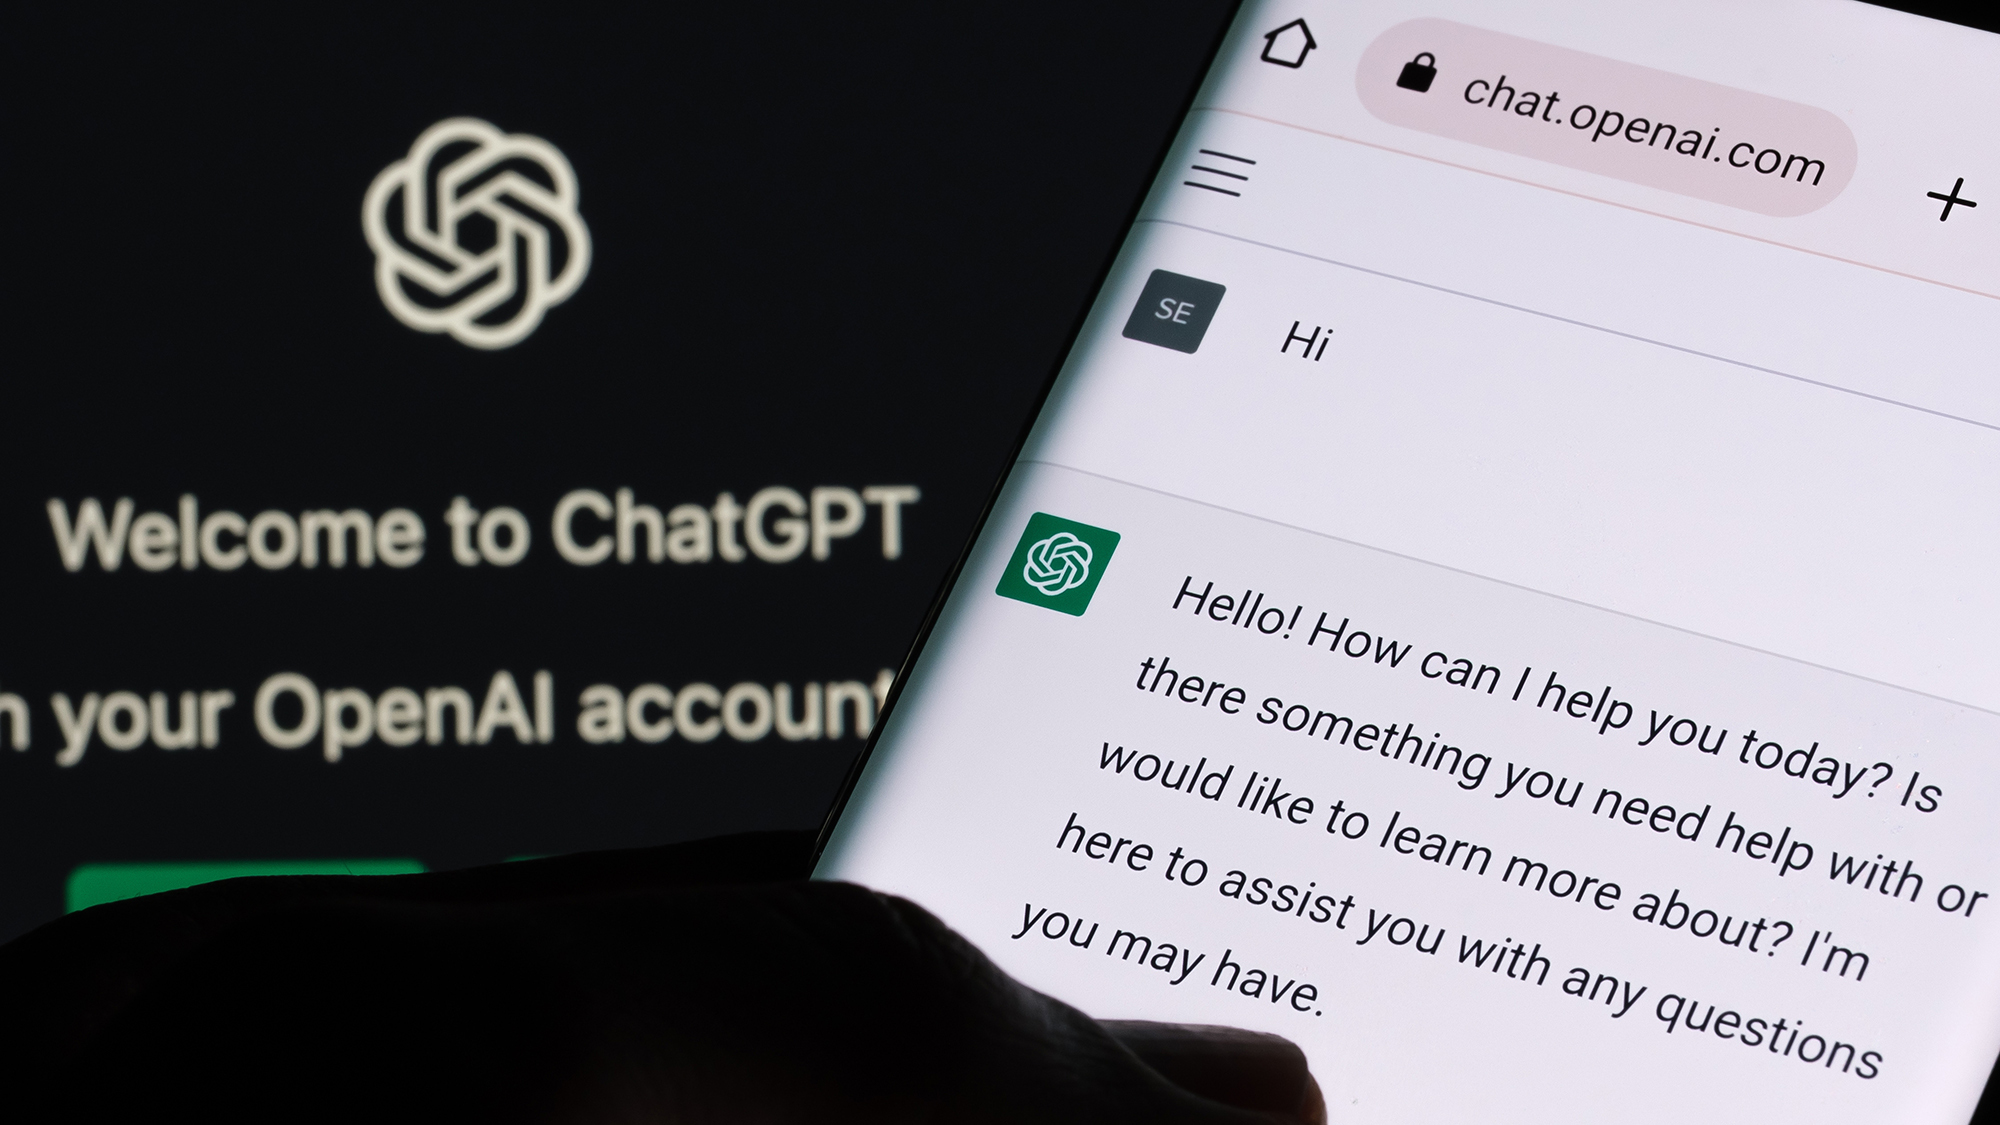 ChatGPT chatbot AI from Open AI